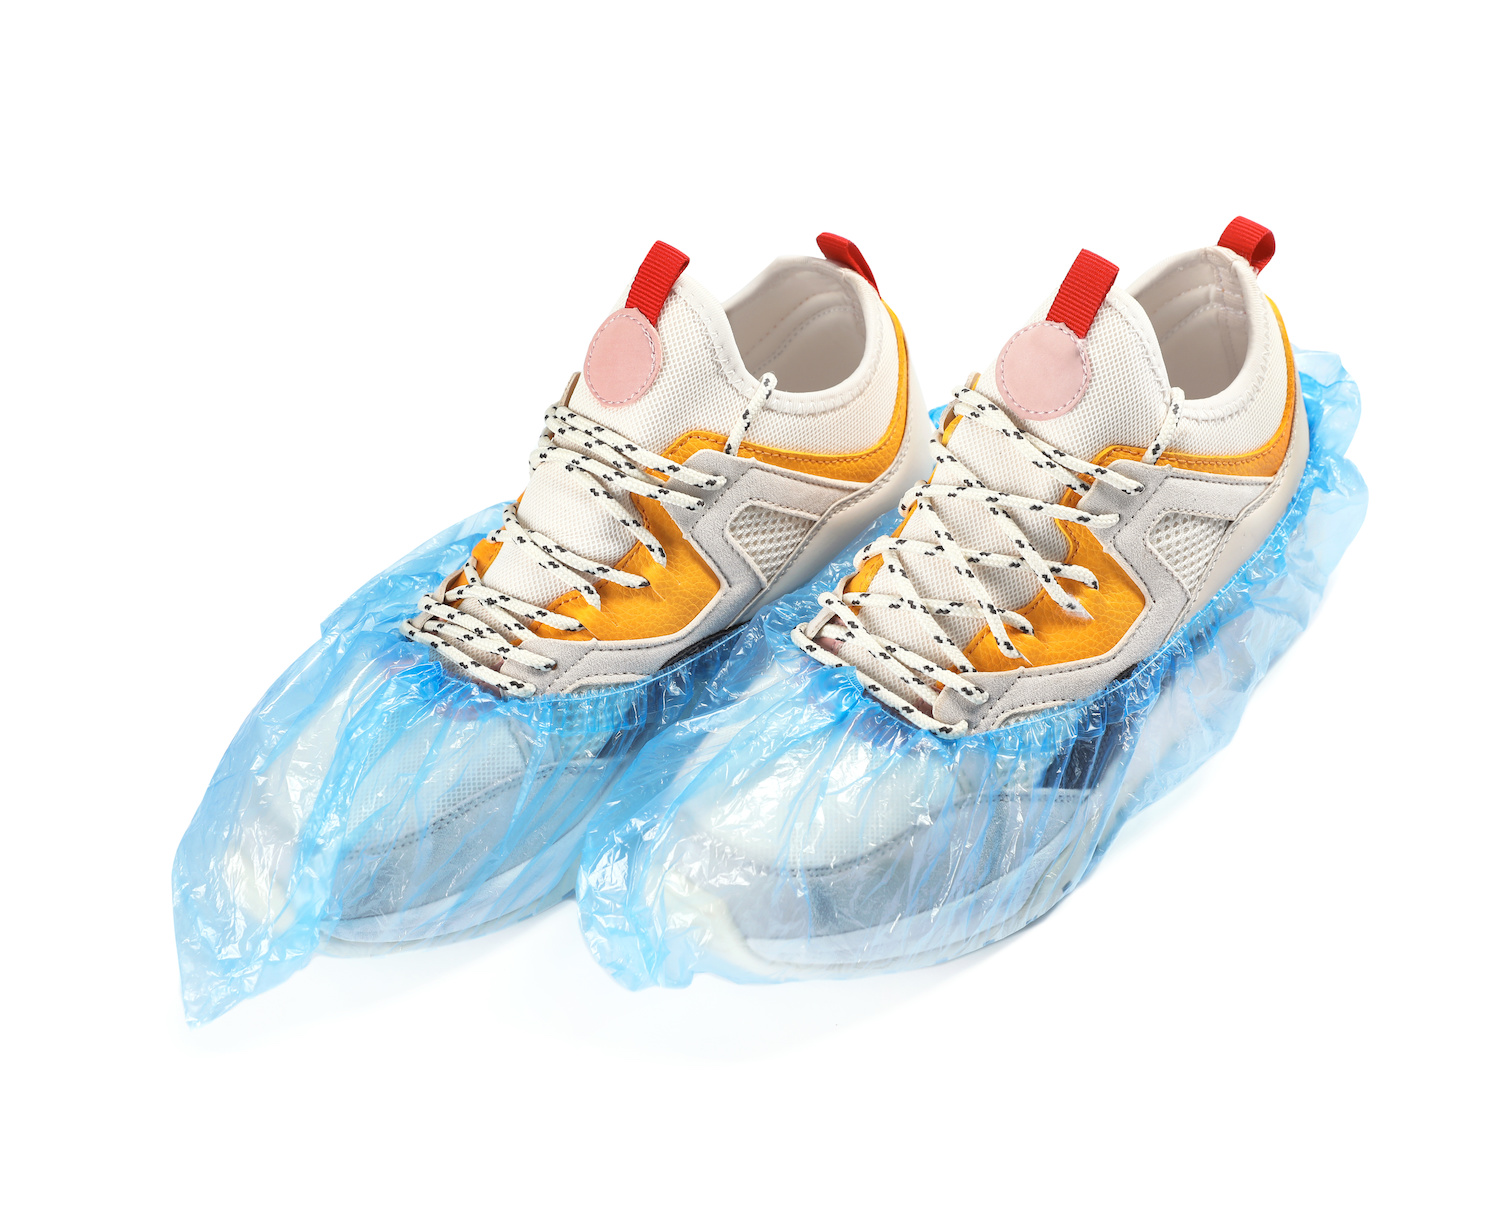 Pair of sneakers in medical blue covers on white background.